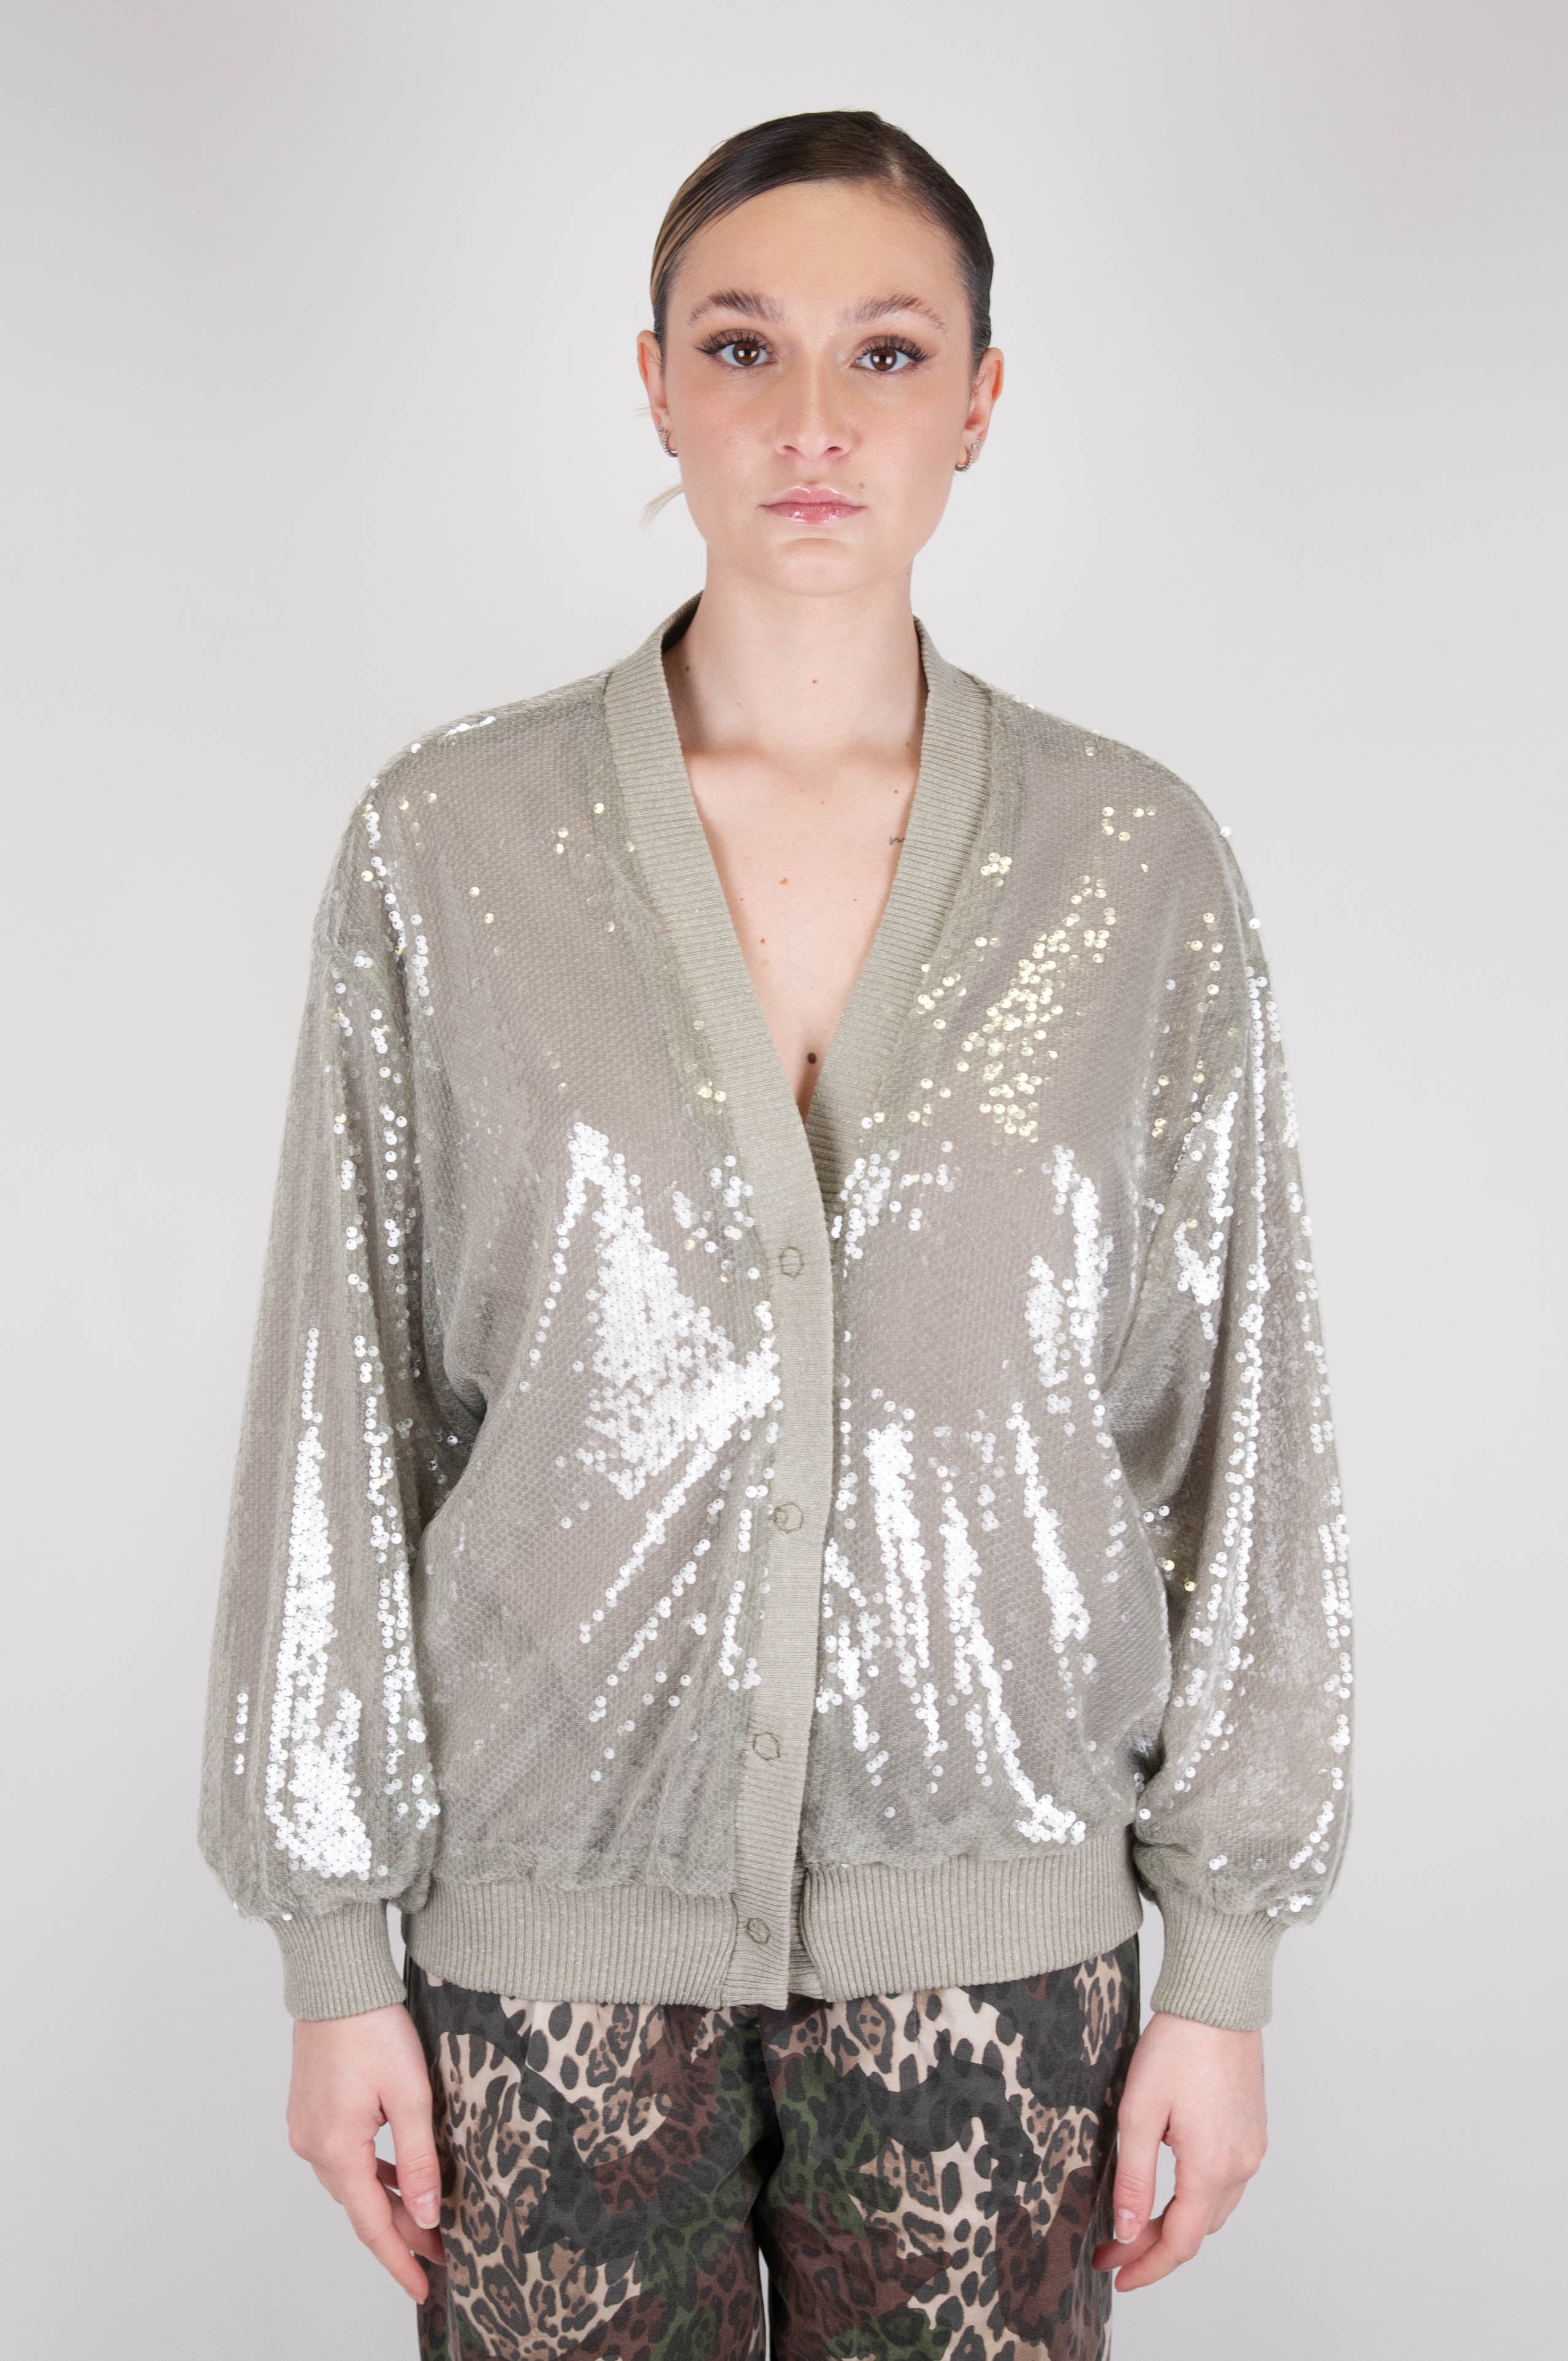 Tensione in - Giacca bomber paillettes